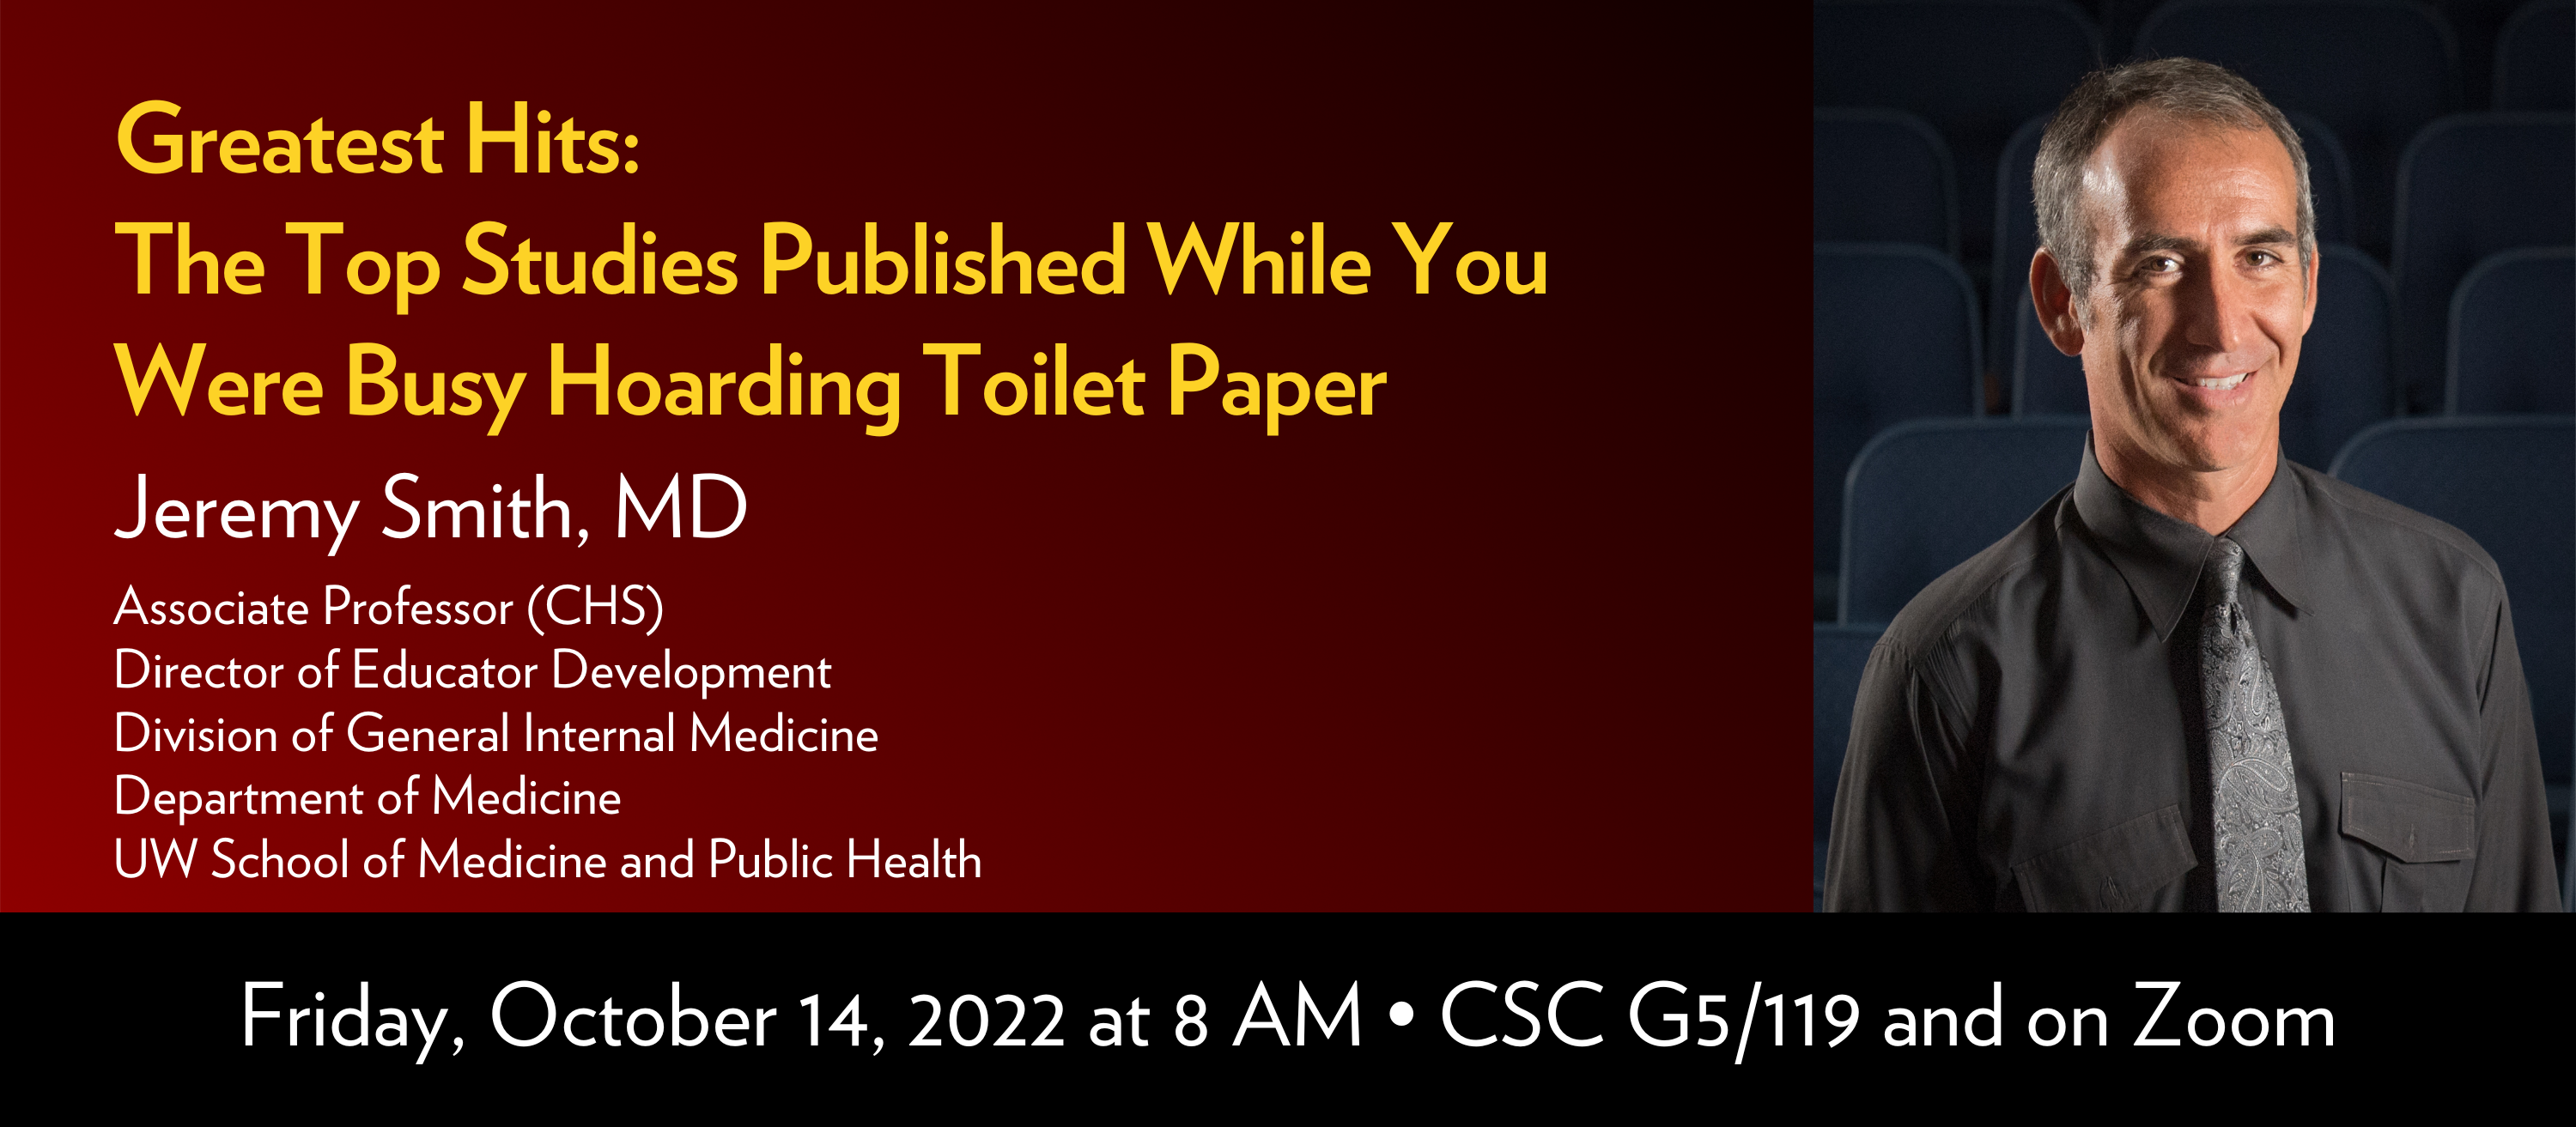 Title: The Greatest Hits: The Top Studies Published While You Where Busy Hoarding Toilet Paper